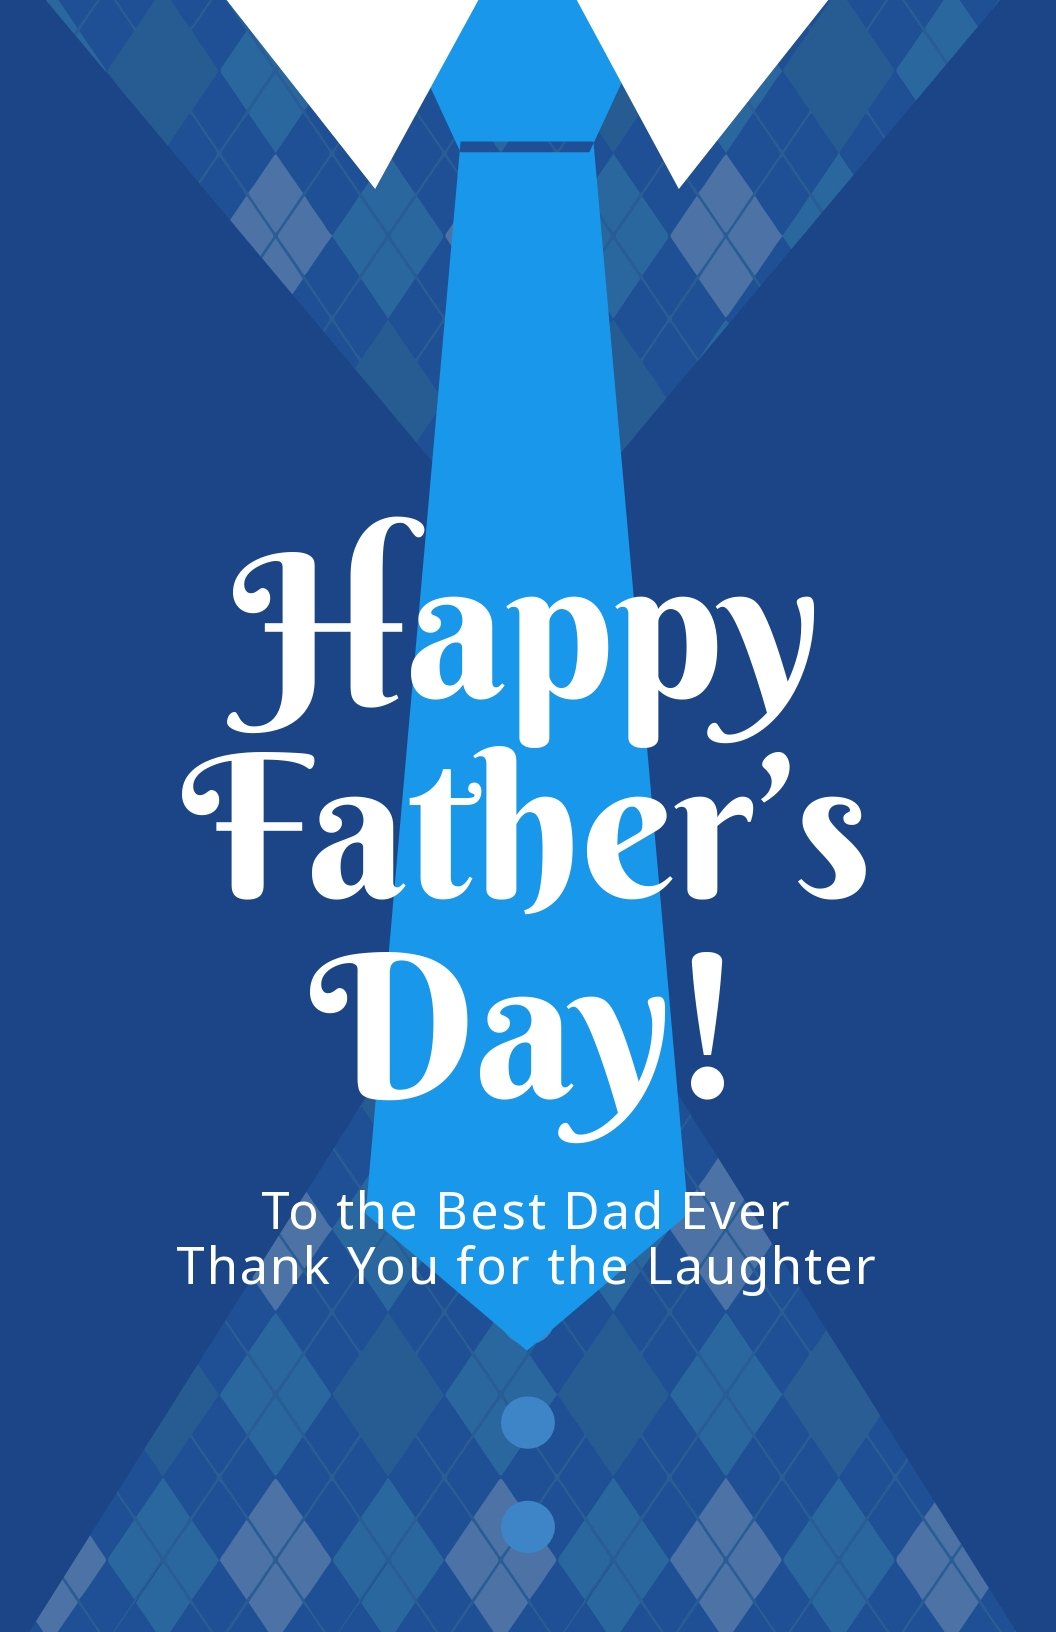 Creative Father's Day Poster Template